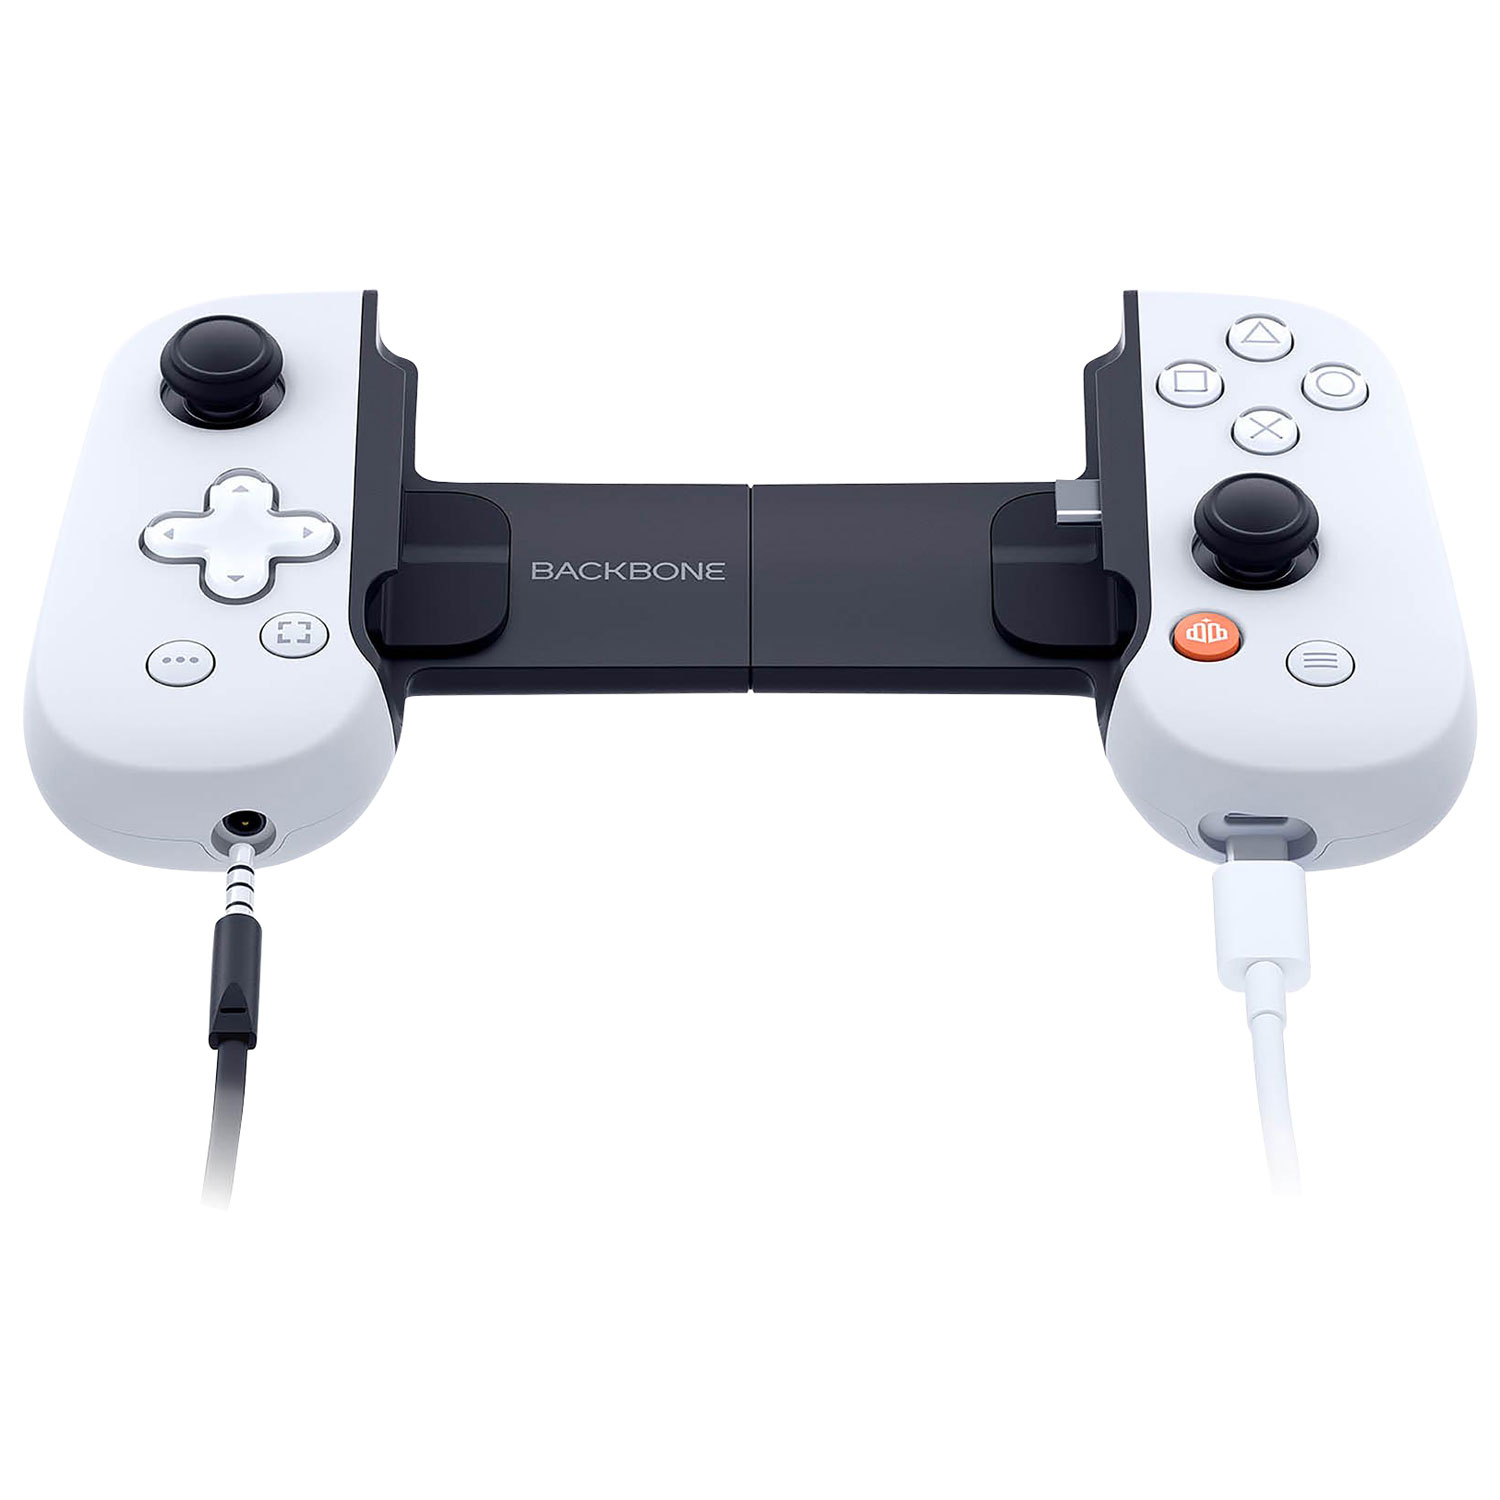 Backbone One Play Station Gaming Controller for Android Smartphone